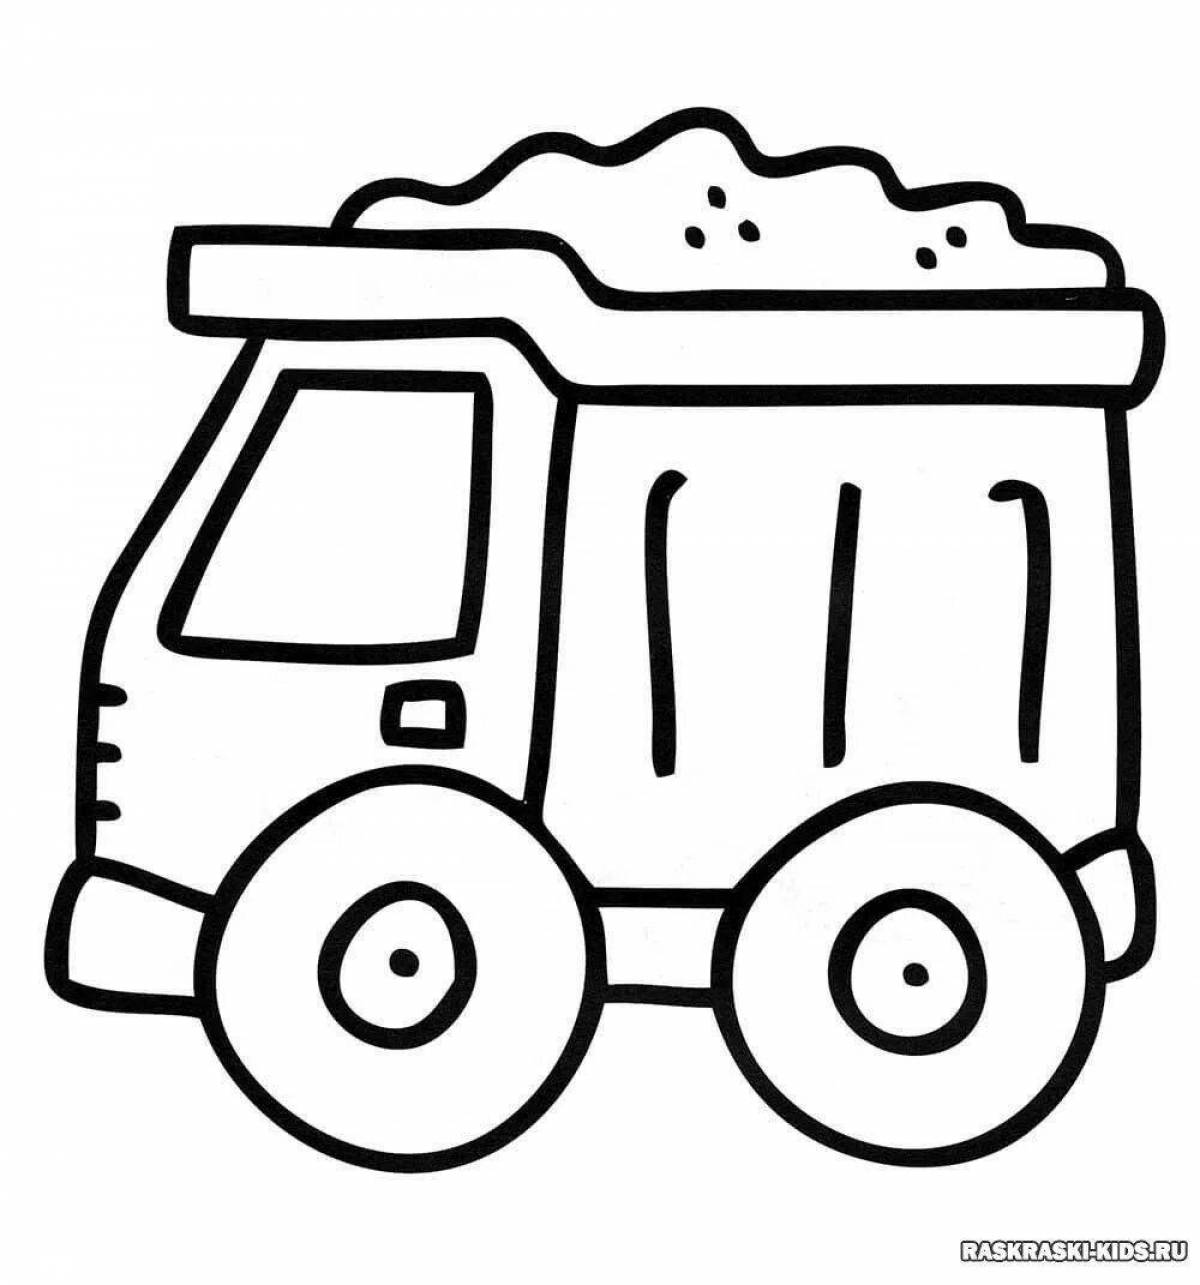 Coloring pages adorable cars for boys 2 years old